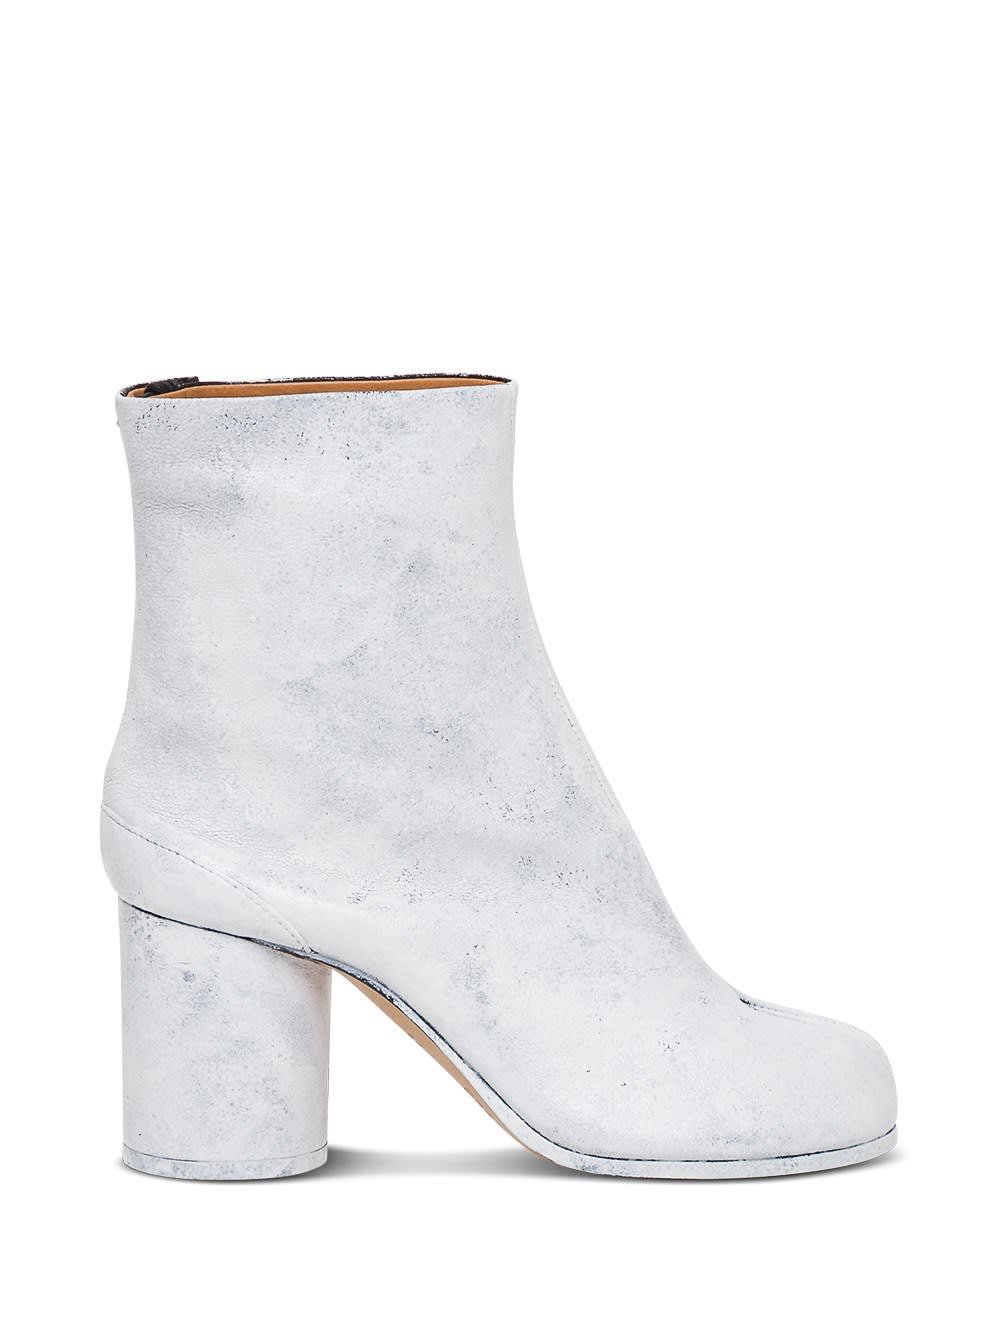 Maison Margiela Tabi Ankle Boots In White Aged Effect Leather